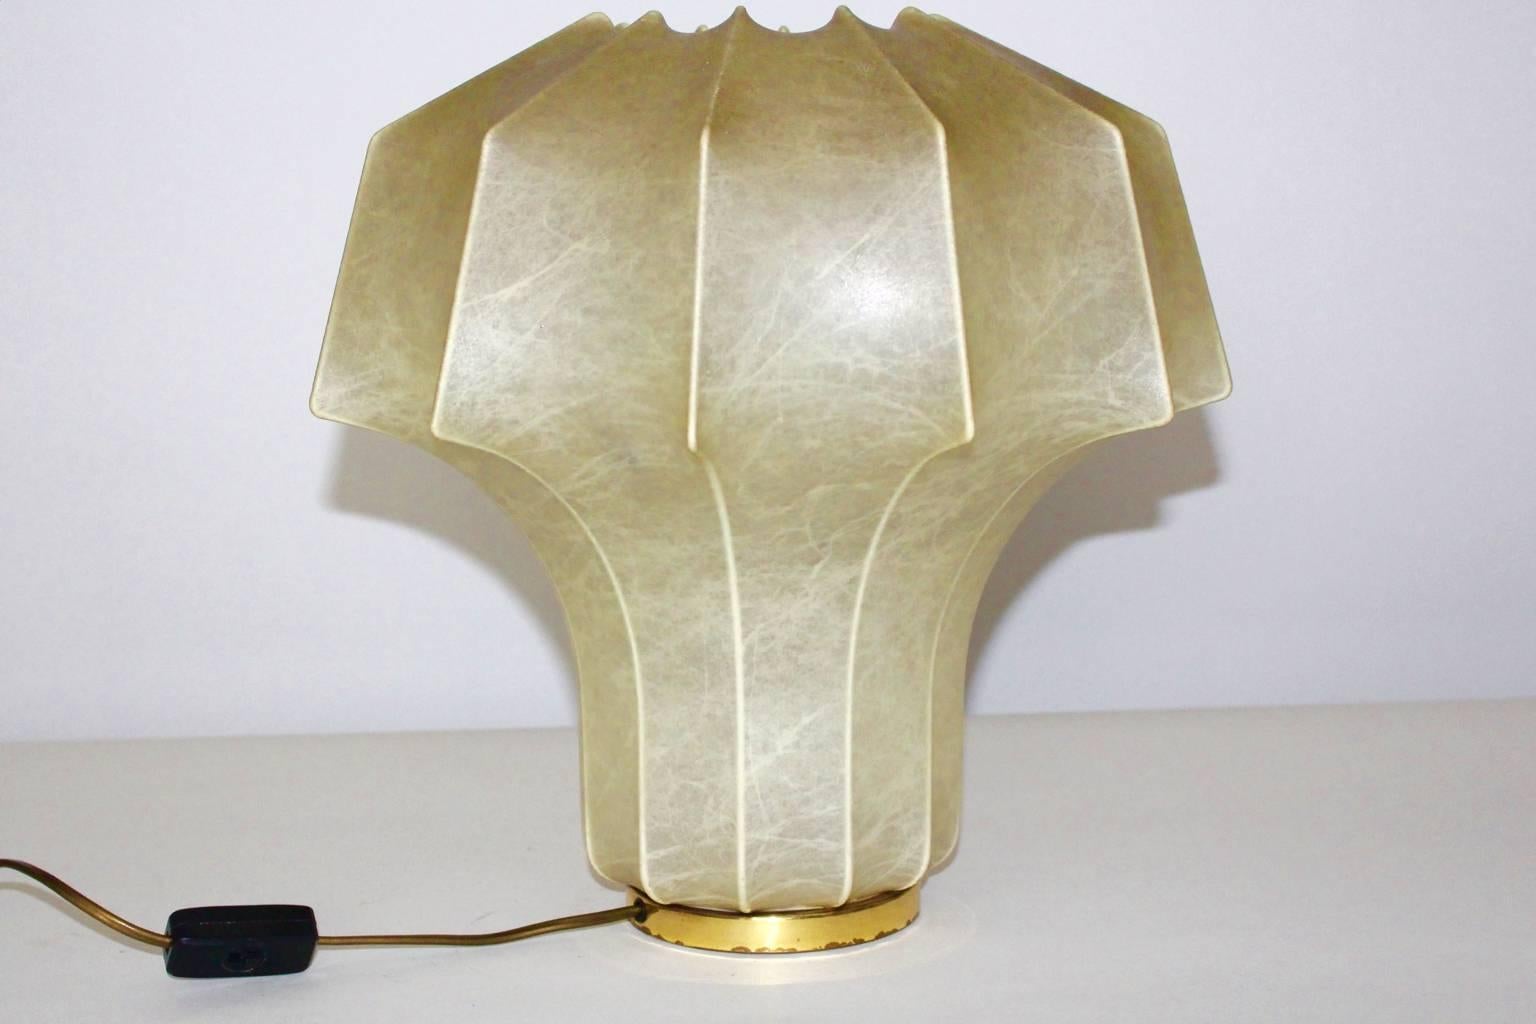 Mid century modern organic biomorph vintage table lamp in the style of Achille & Pier Giacomo Castiglioni, 1960s.
The vintage table lamp by Linus Bopp, Limbach 1960s, Germany is labeled underneath.
Furthermore the metal frame is covered with